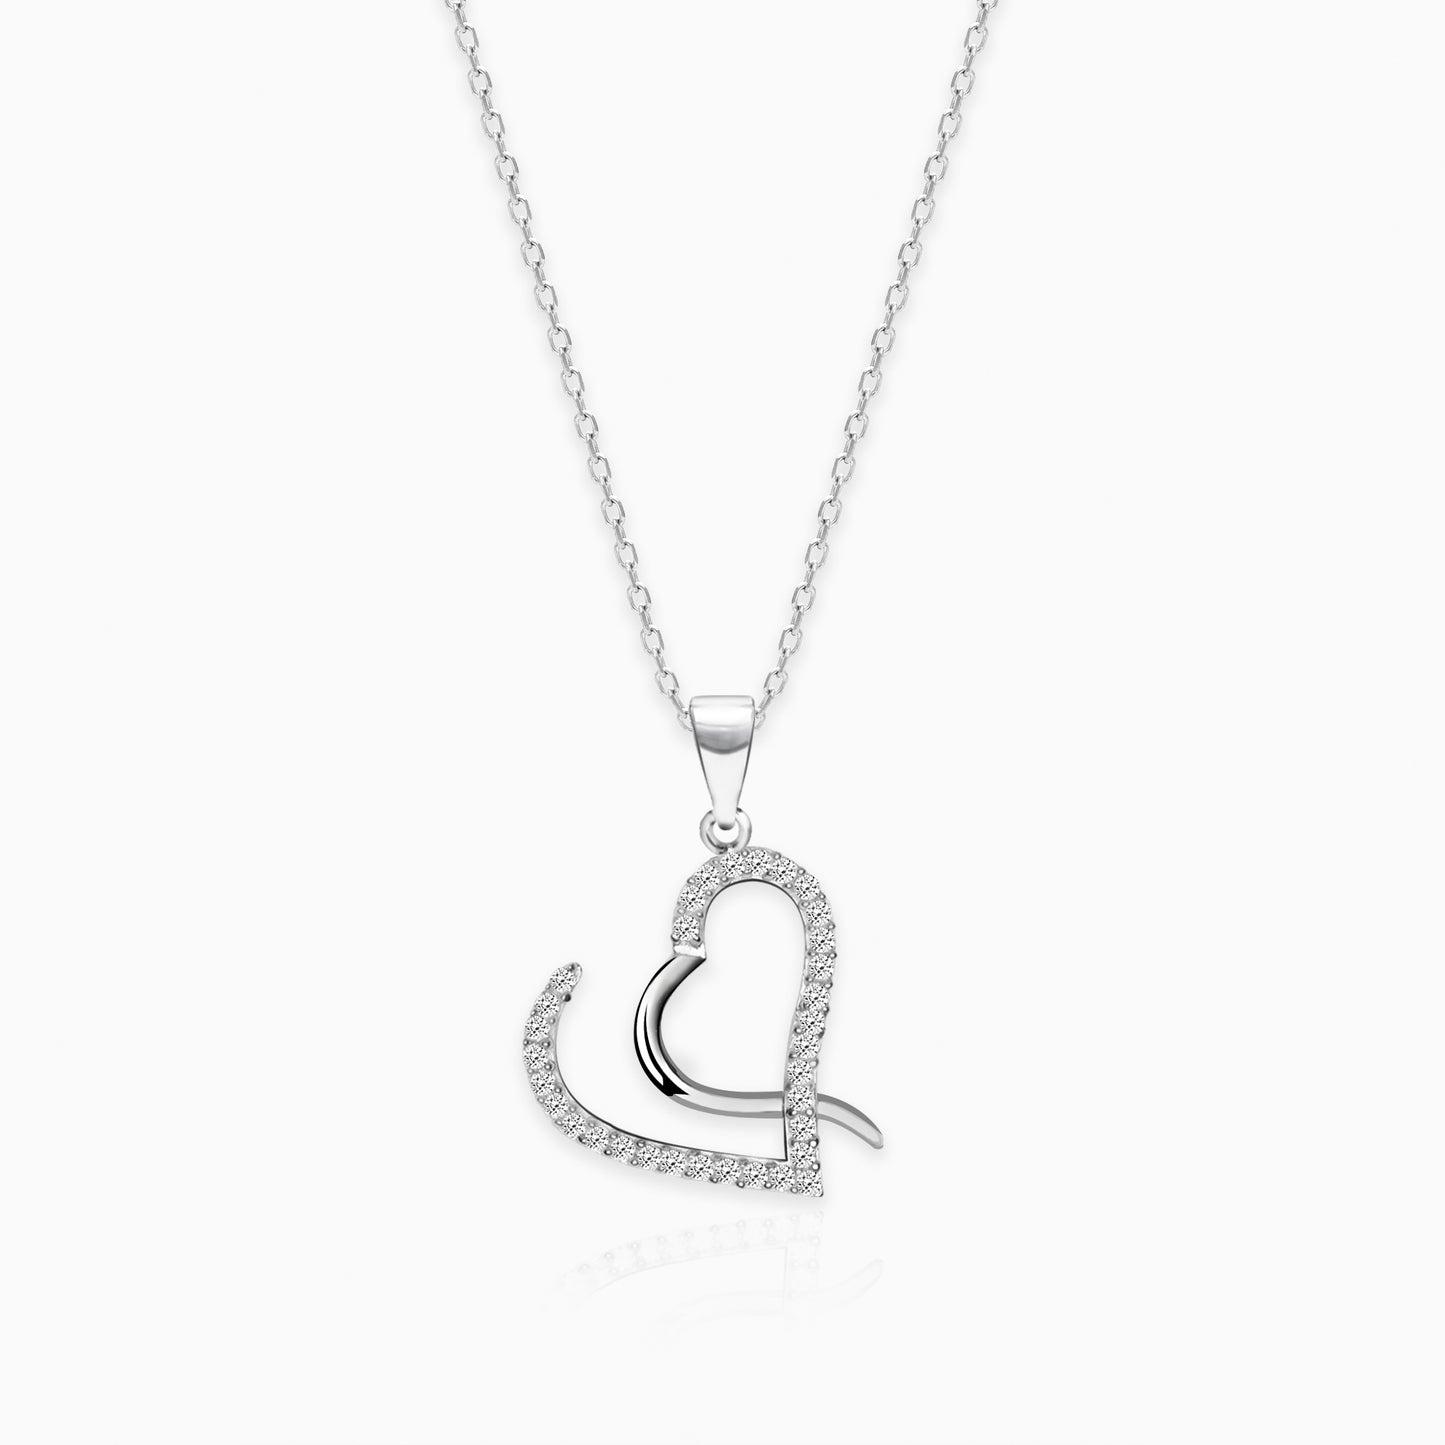 Silver Studded Curl Heart Pendant with Link Chain